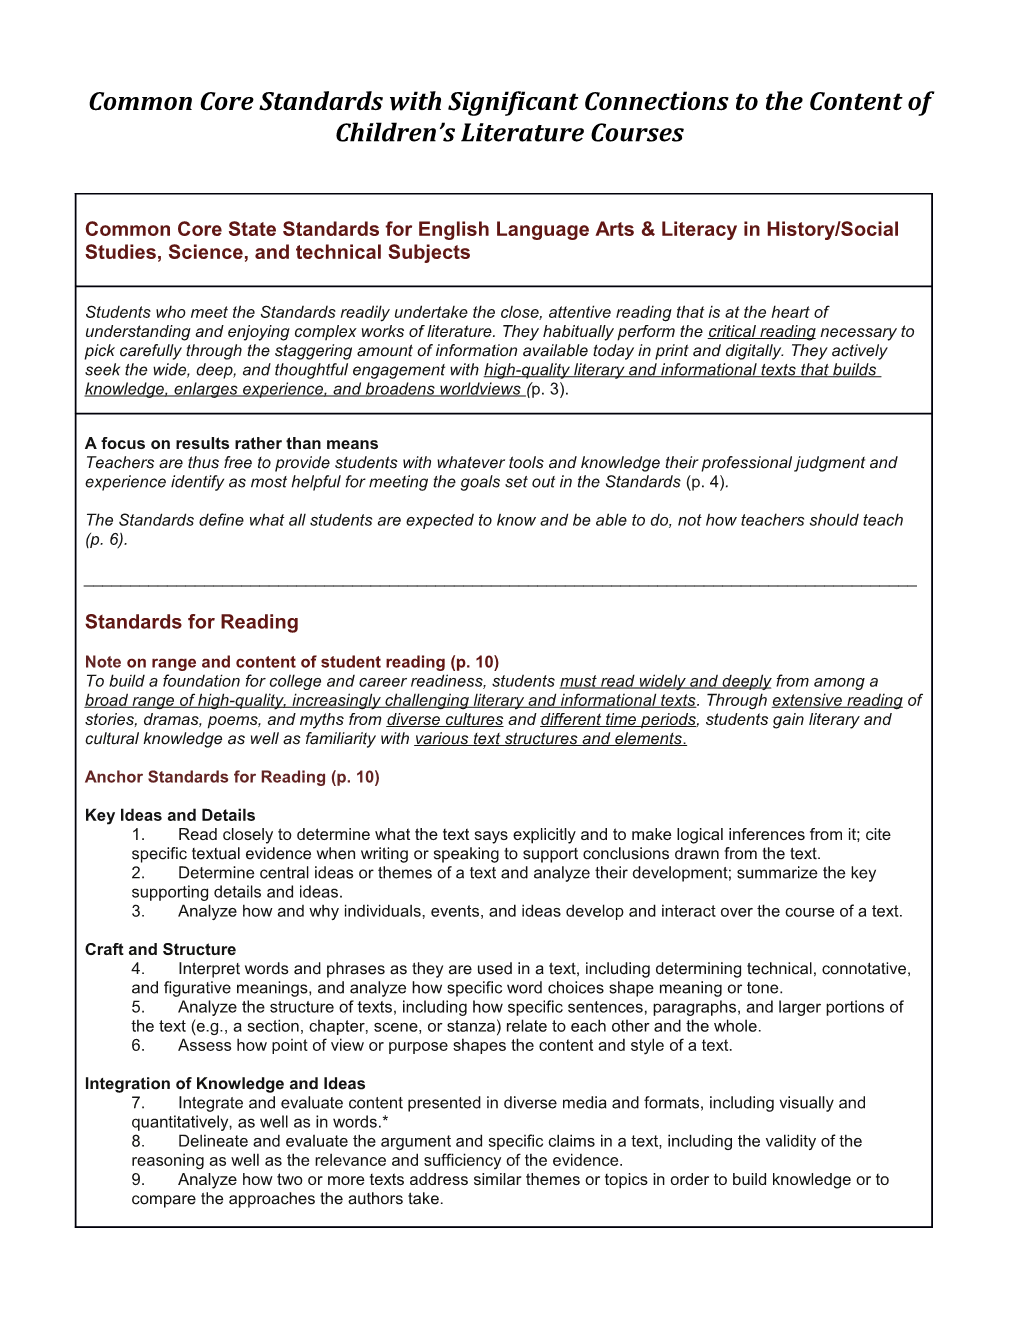 Common Core Standards with Significant Connections to the Content of Children S Literature